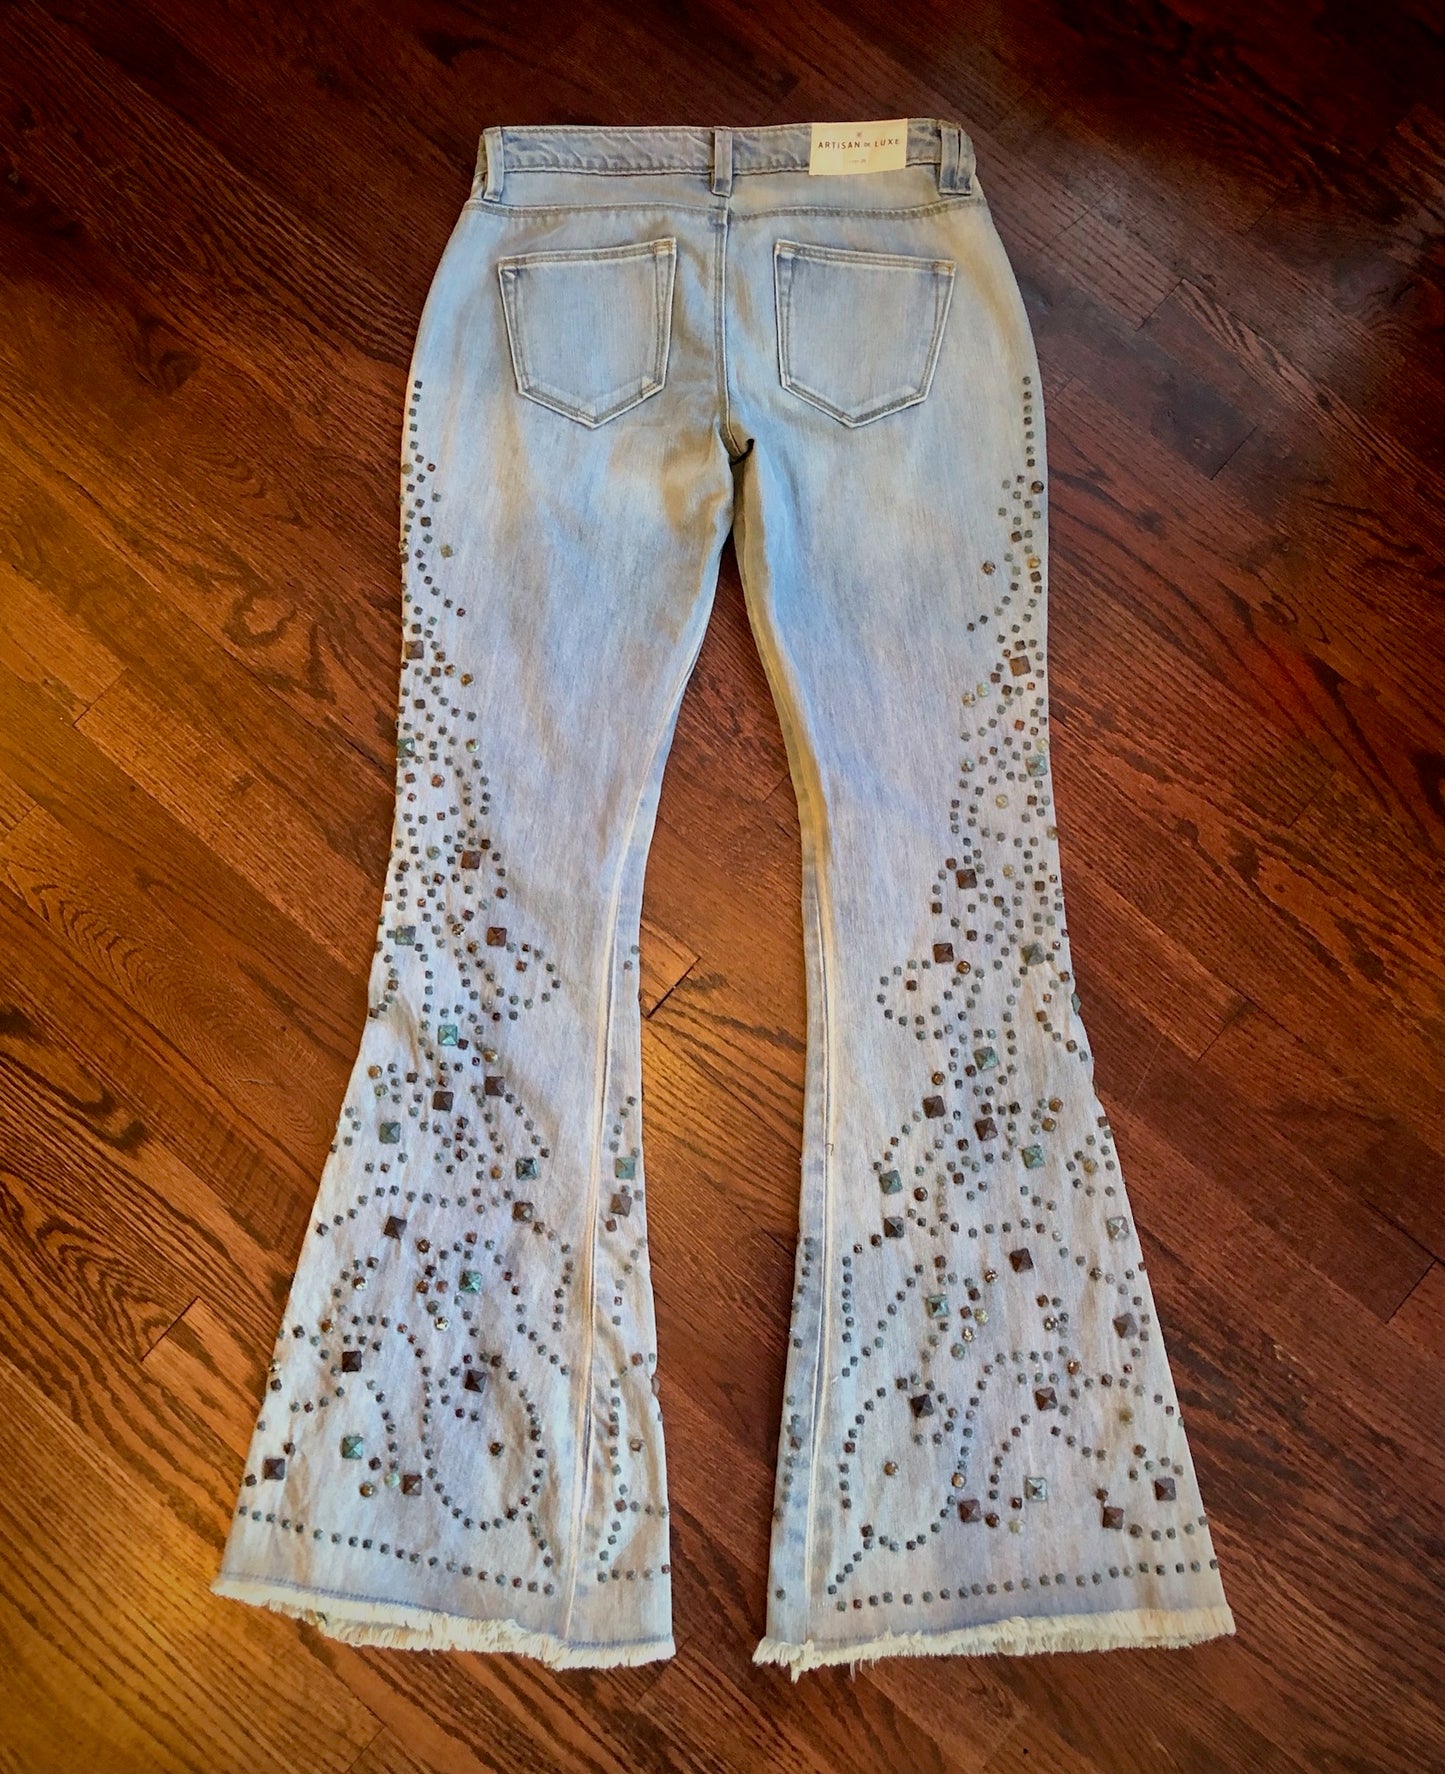 Artisan De Luxe “Chelsey” Studded Flare Jeans Size 26”